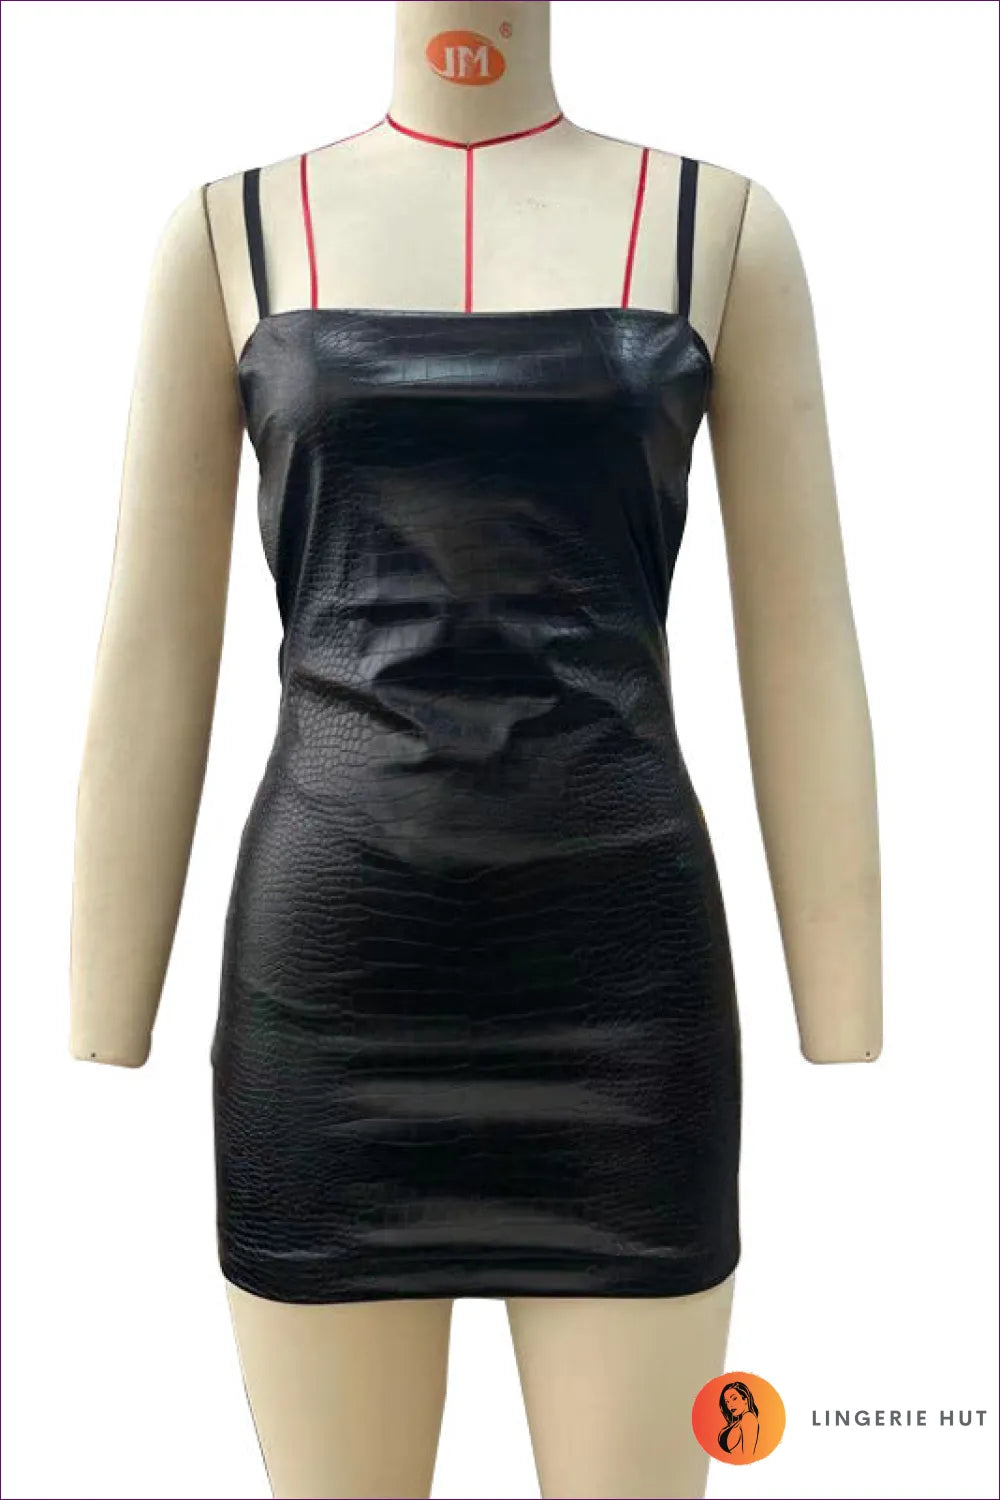 Step Out In Lingerie Hut’s Crocodile Texture Mini Dress. a Faux Leather Sensation With a Backless Design